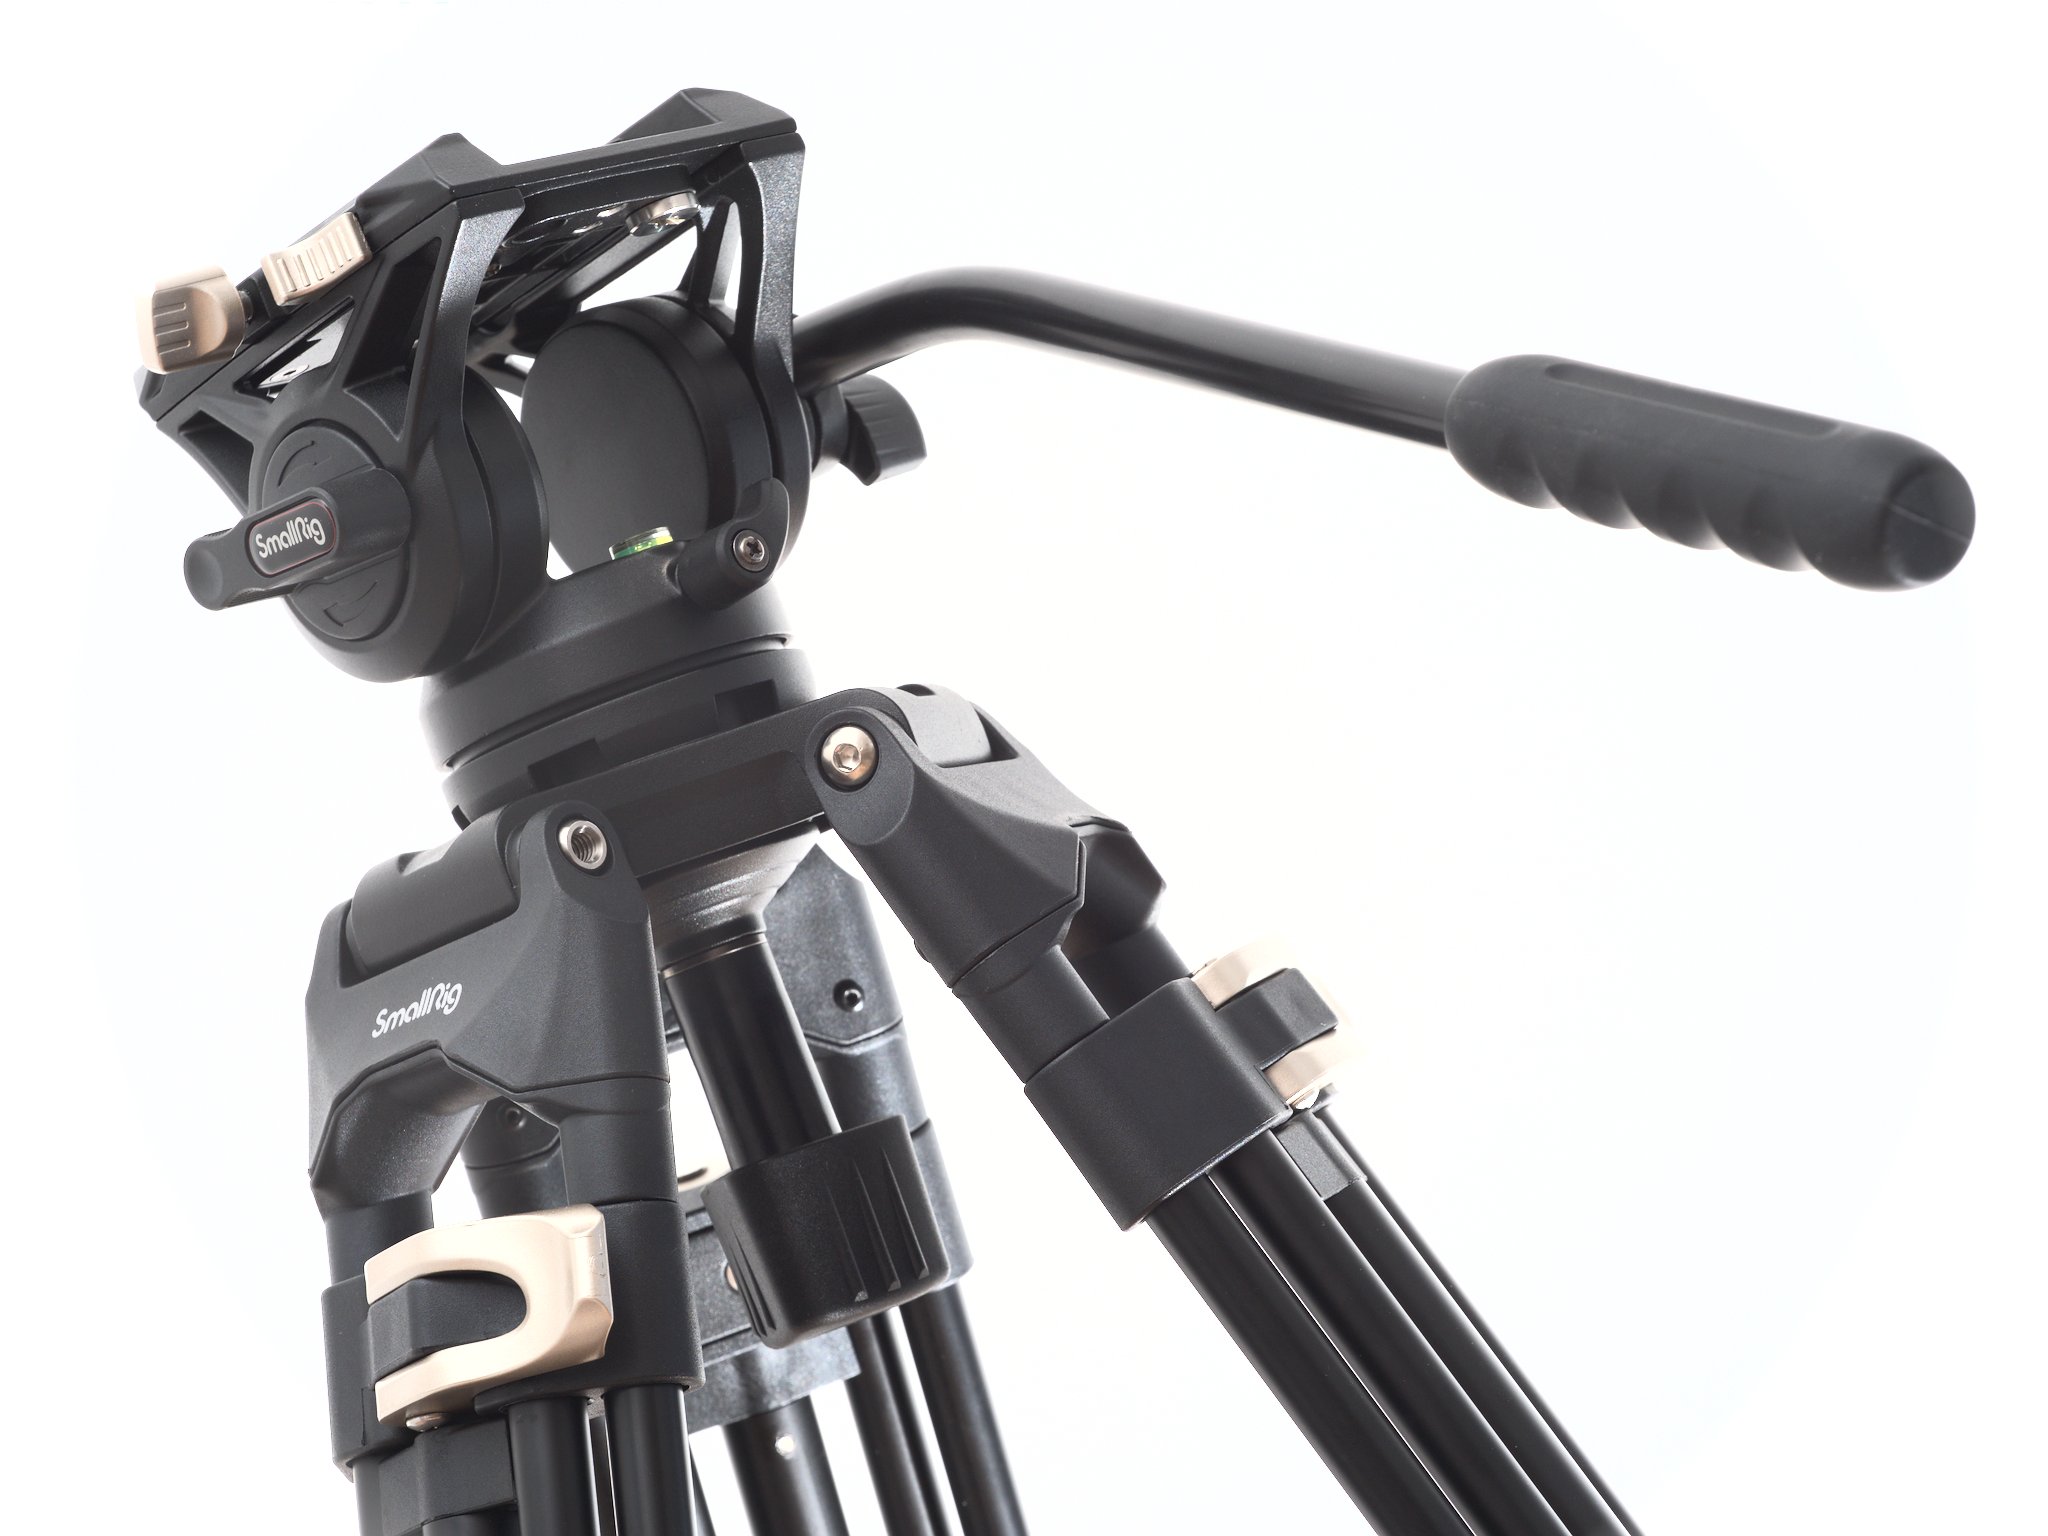 Tripods with Ball Heads, Fluid Head Tripods